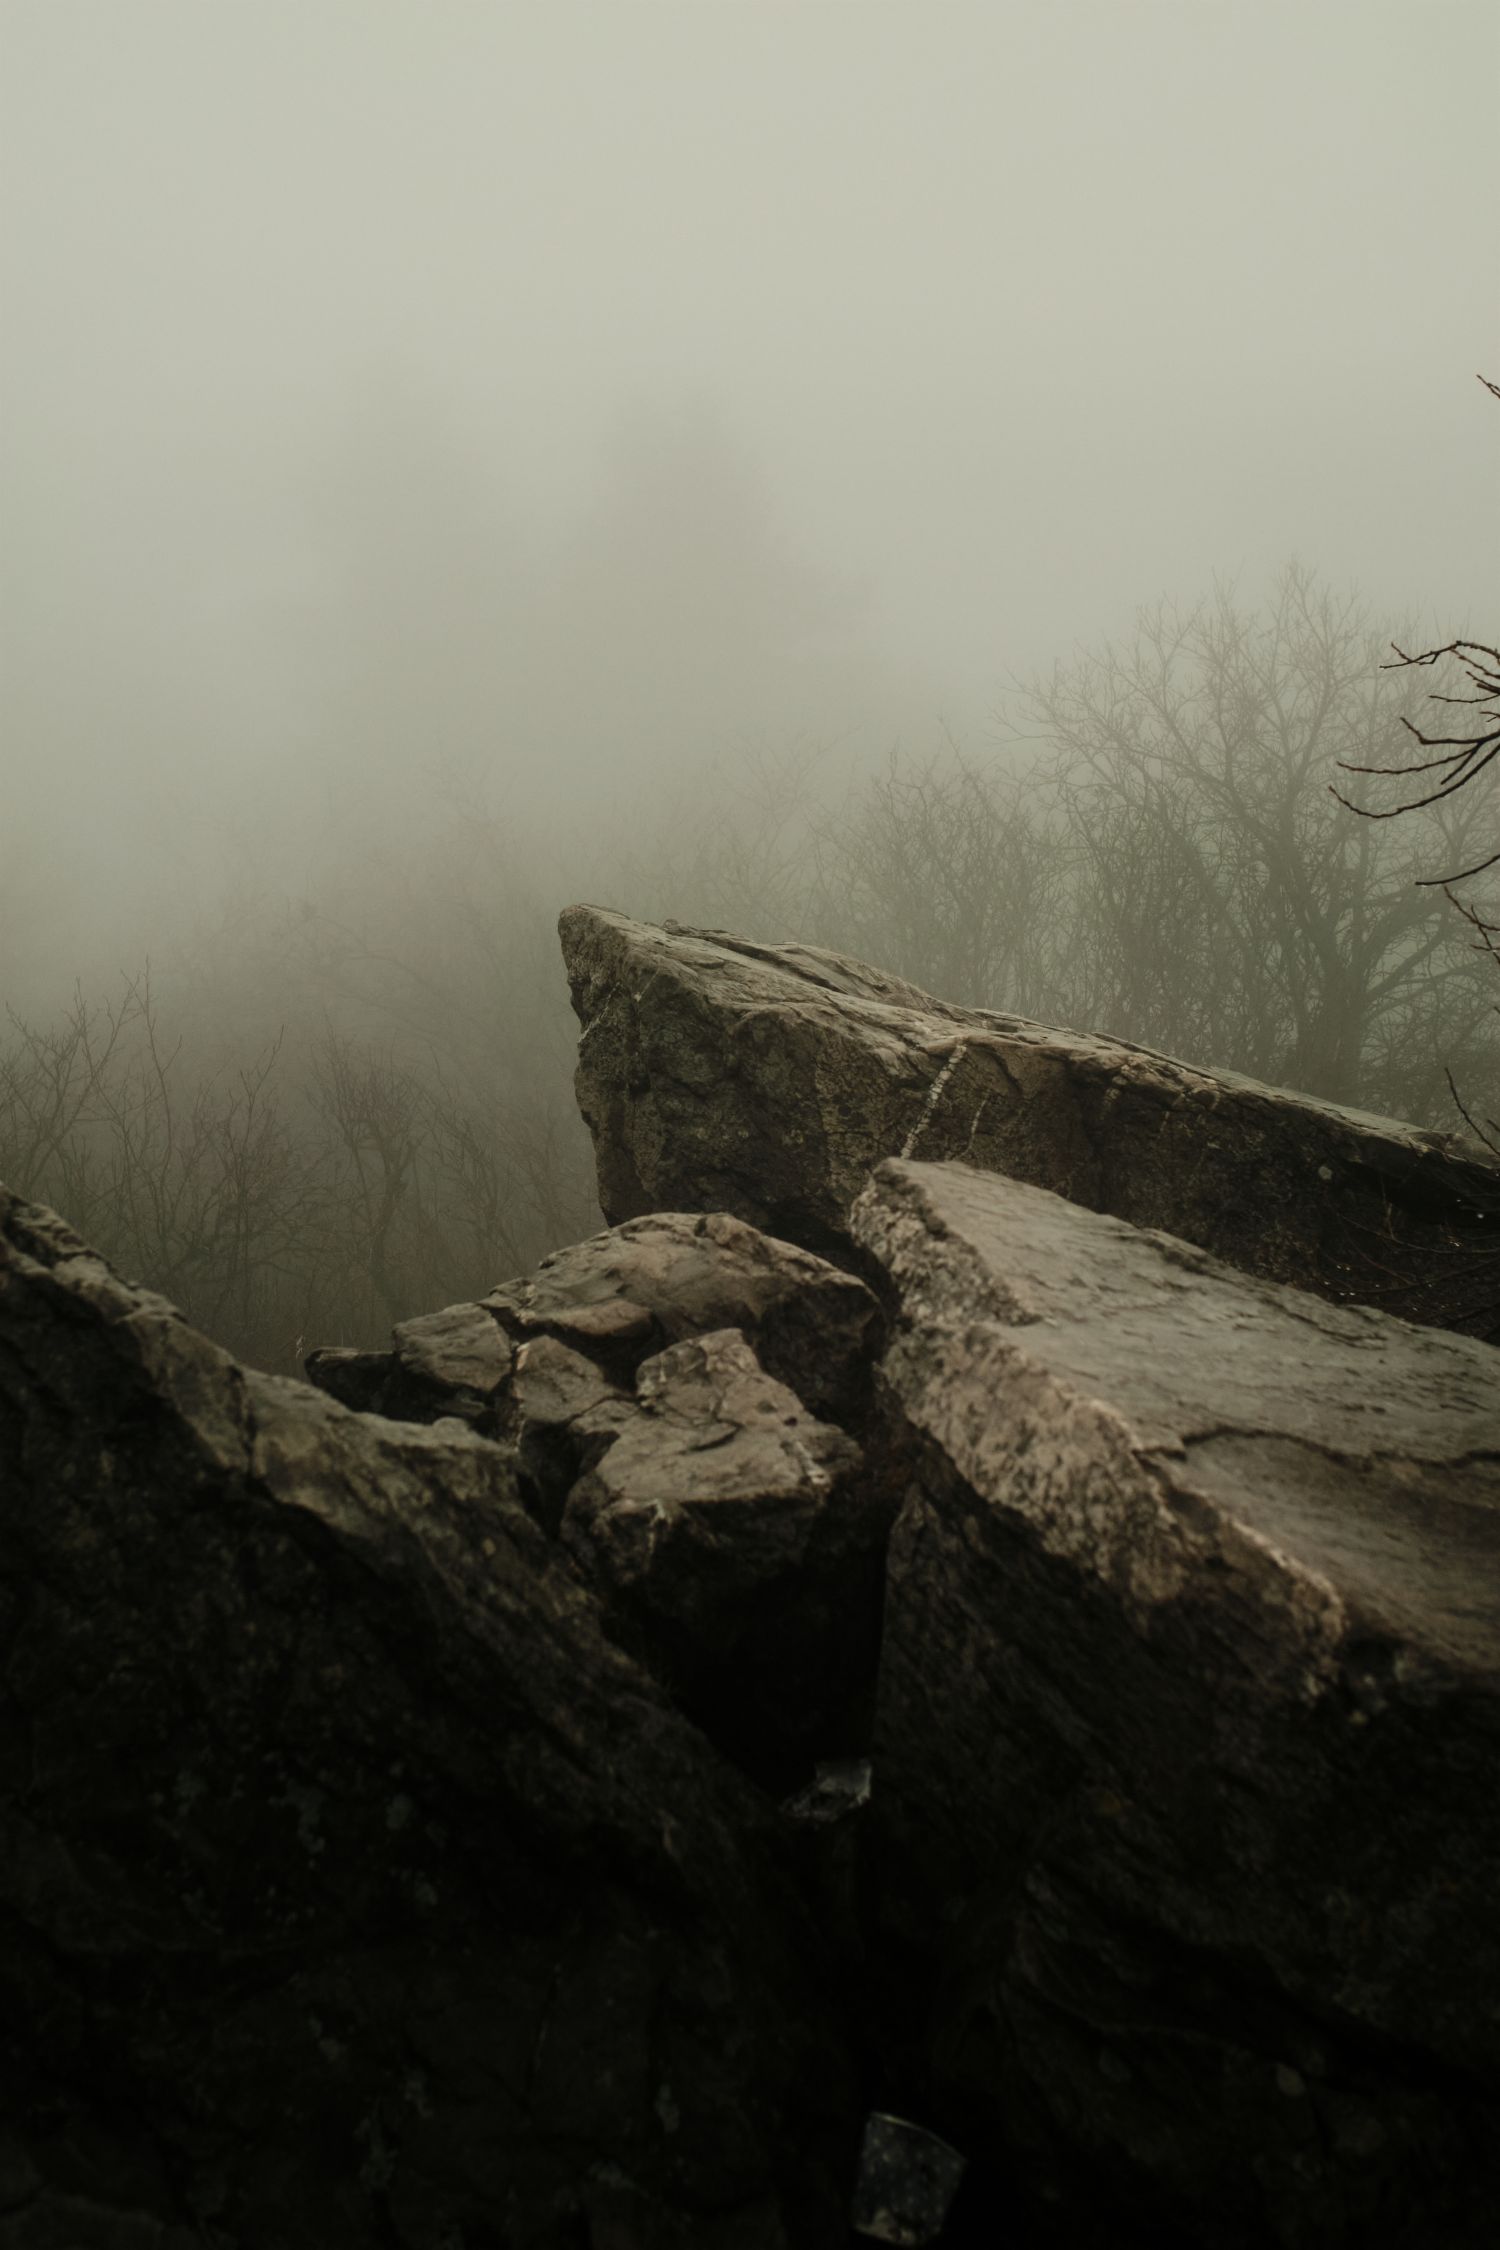 https://toh.photography/media/pages/nft/the-moody-day-hike/4f5996ebb5-1635110734/dscf5660.jpg